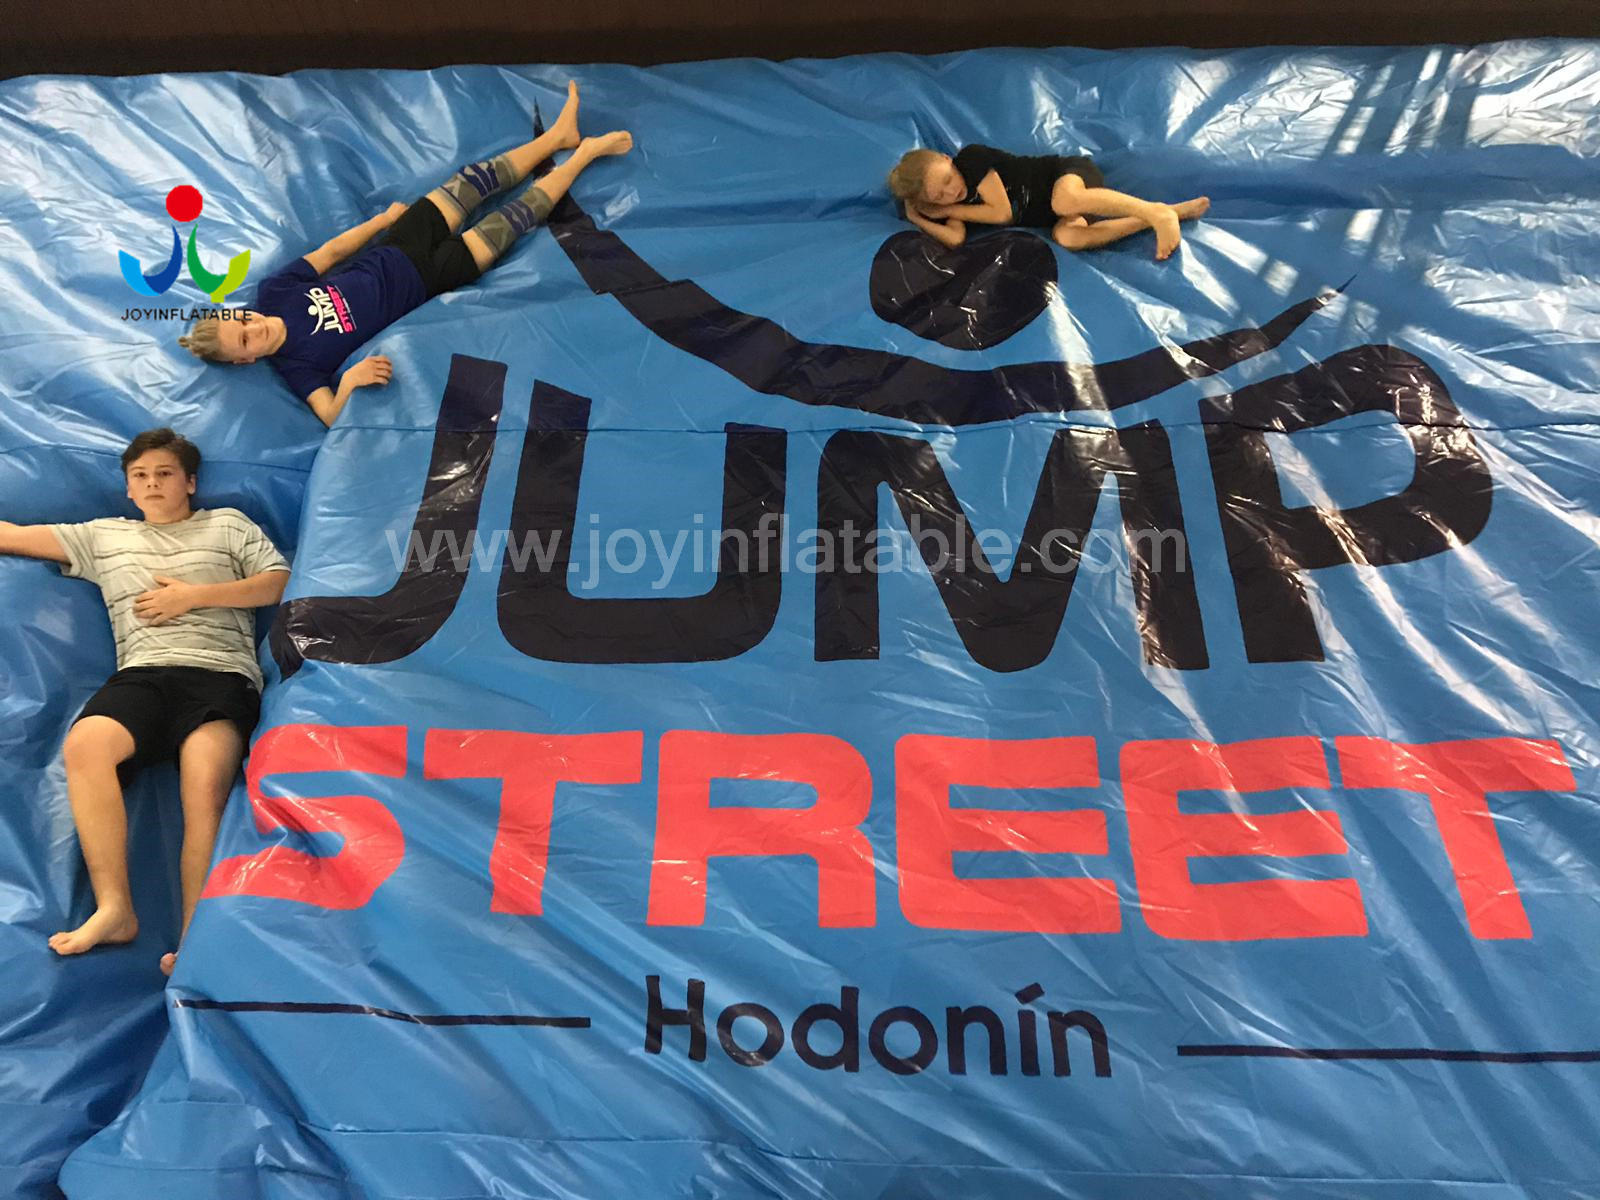 Customized bag jump airbag price supply for high jump training